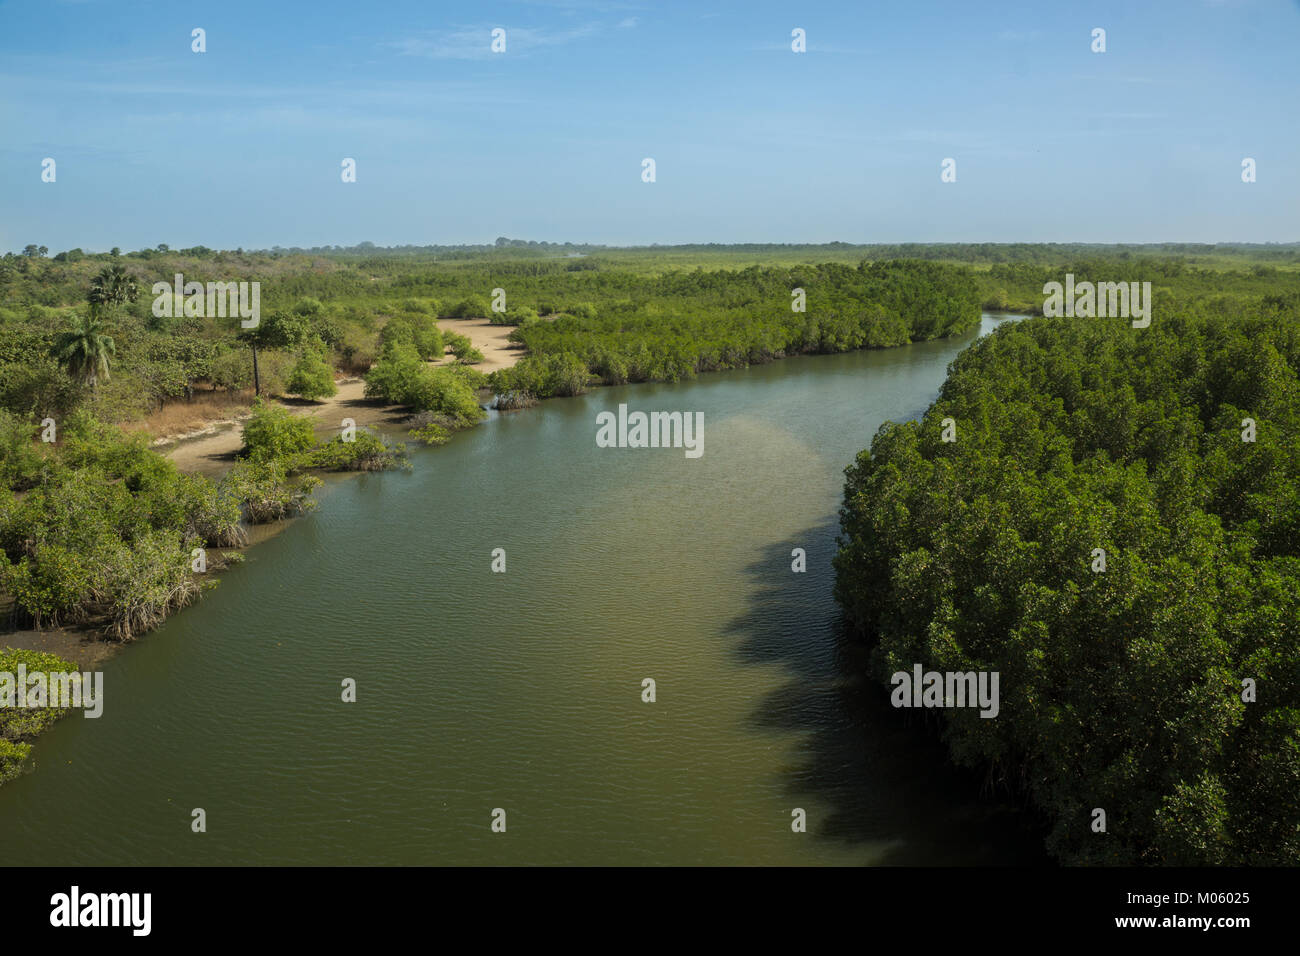 A tributary of the River Gambia in Gambia, Africa Stock Photo